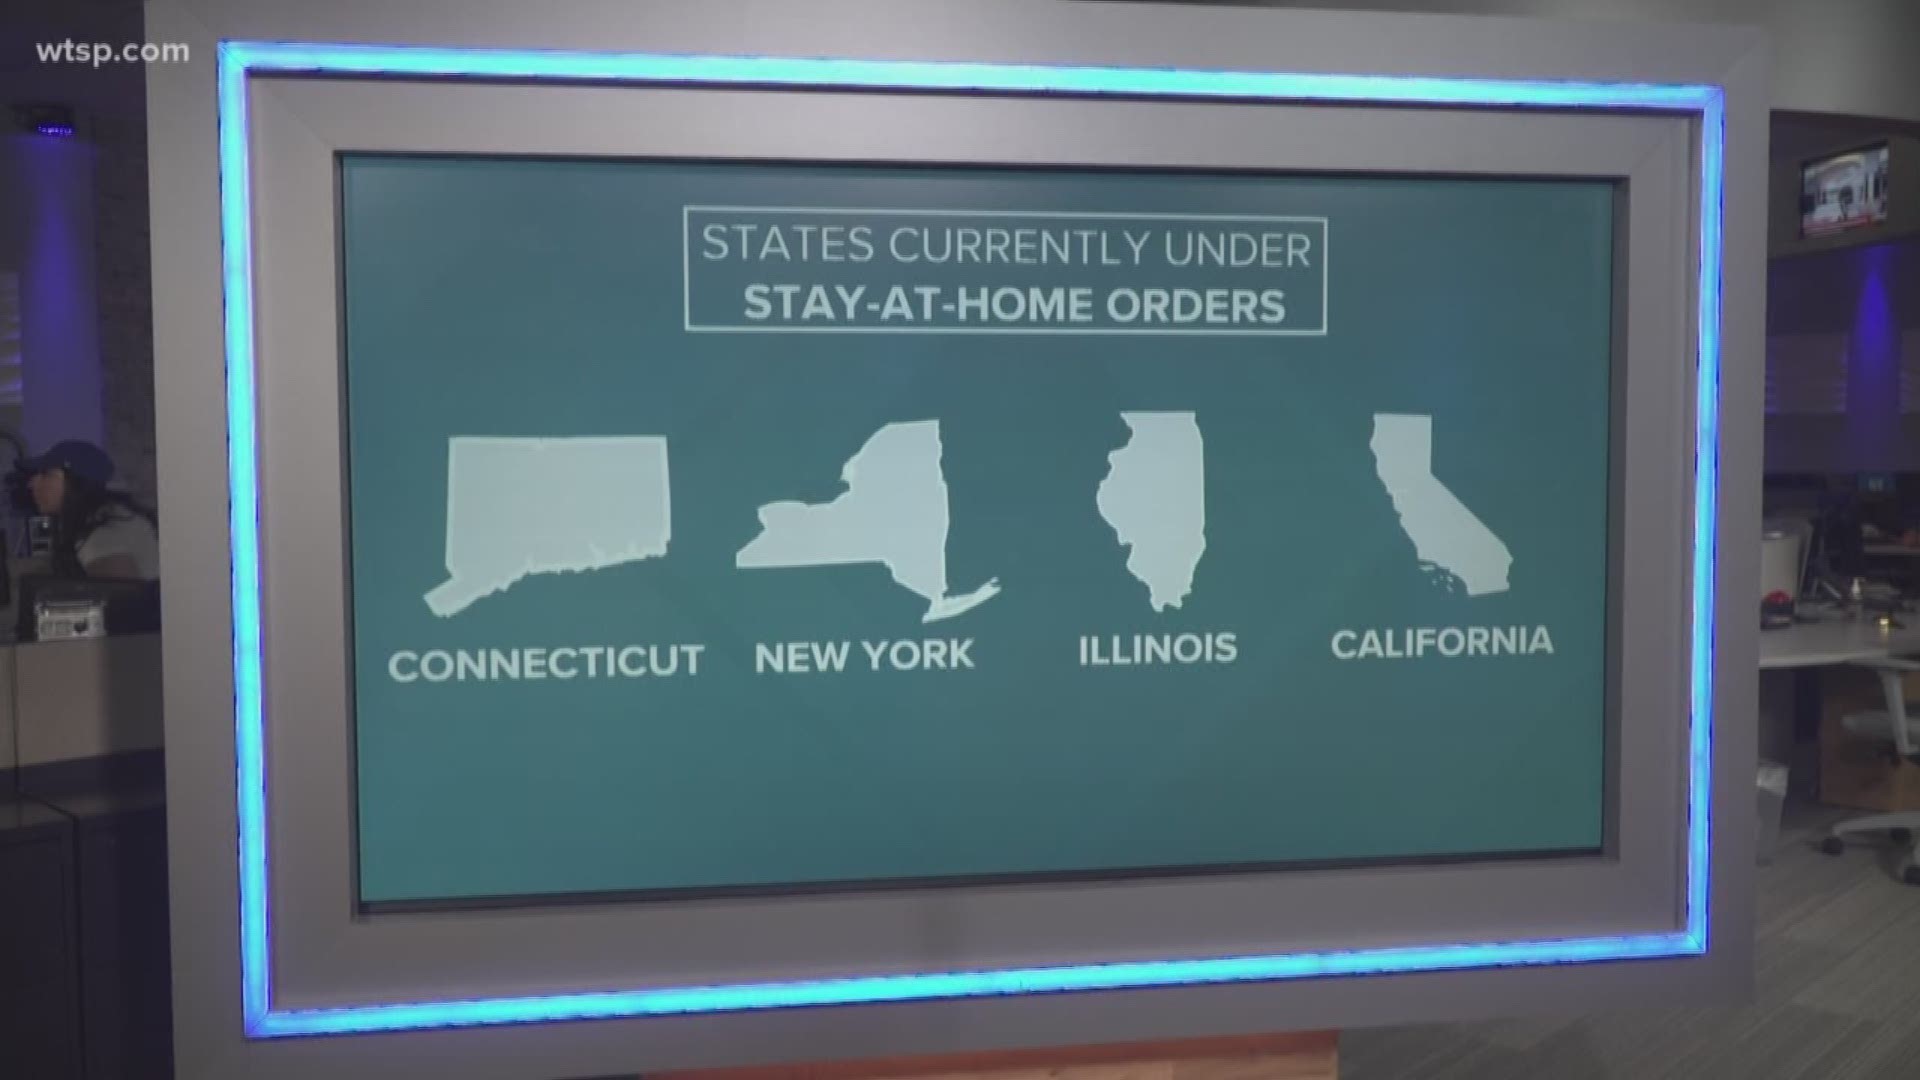 As of Friday evening, three states have already done so: California, New York and Illinois.